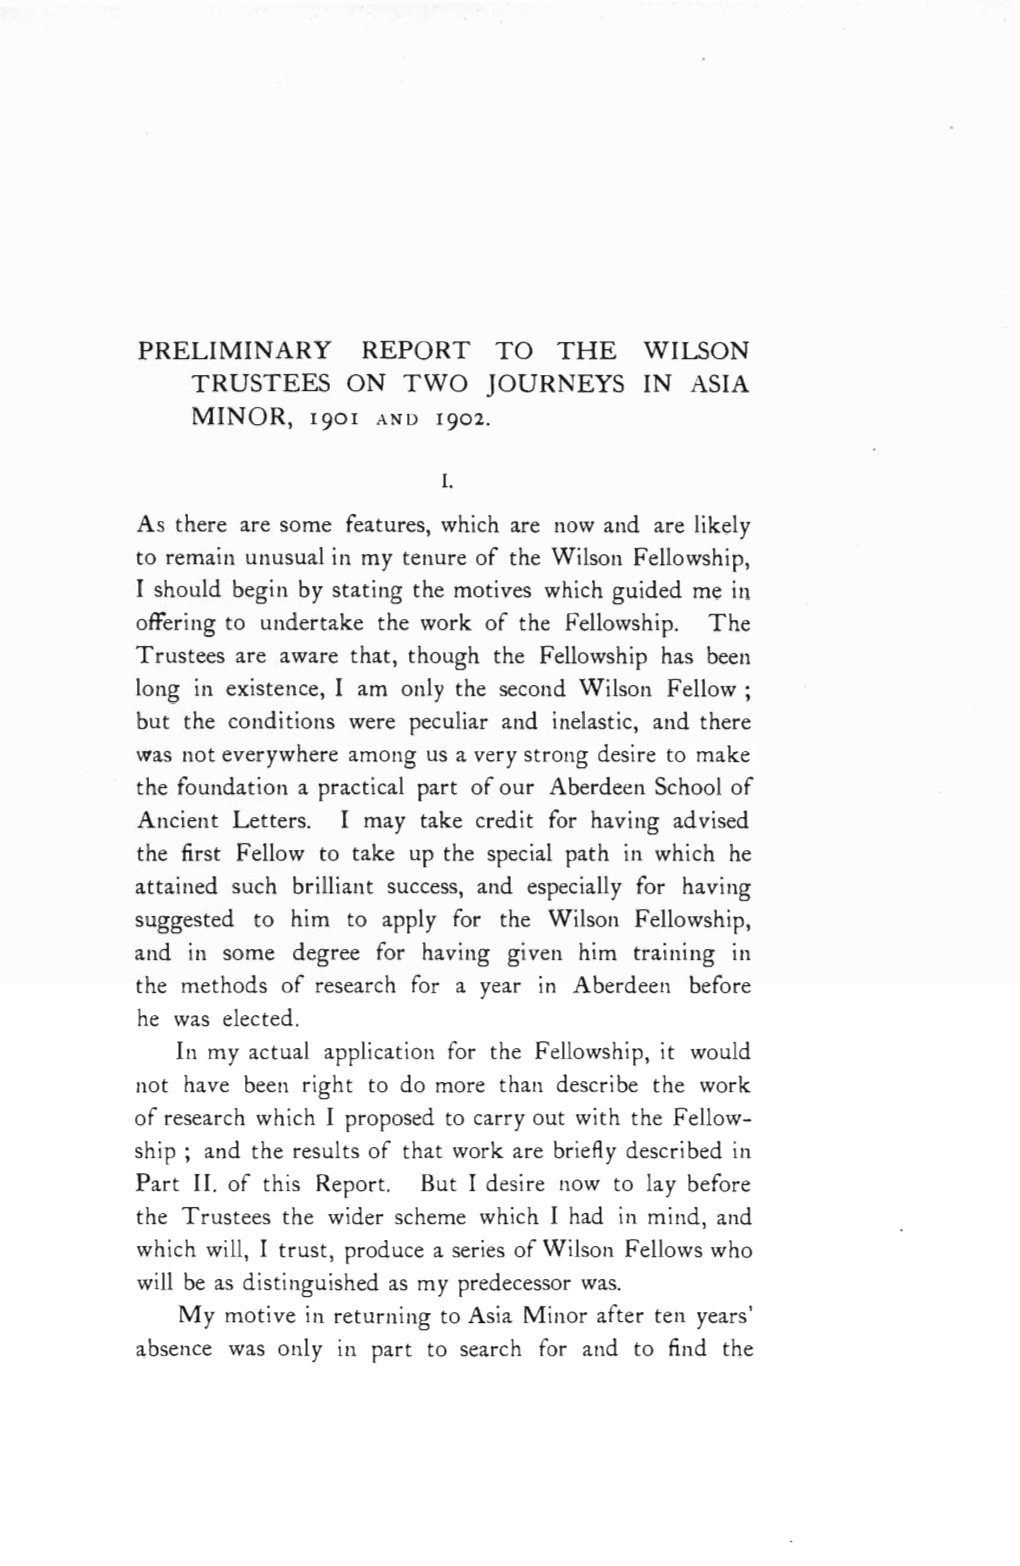 Preliminary Report to the Wilson Trustees on Two Journeys in Asia Minor, 1901 and 1902